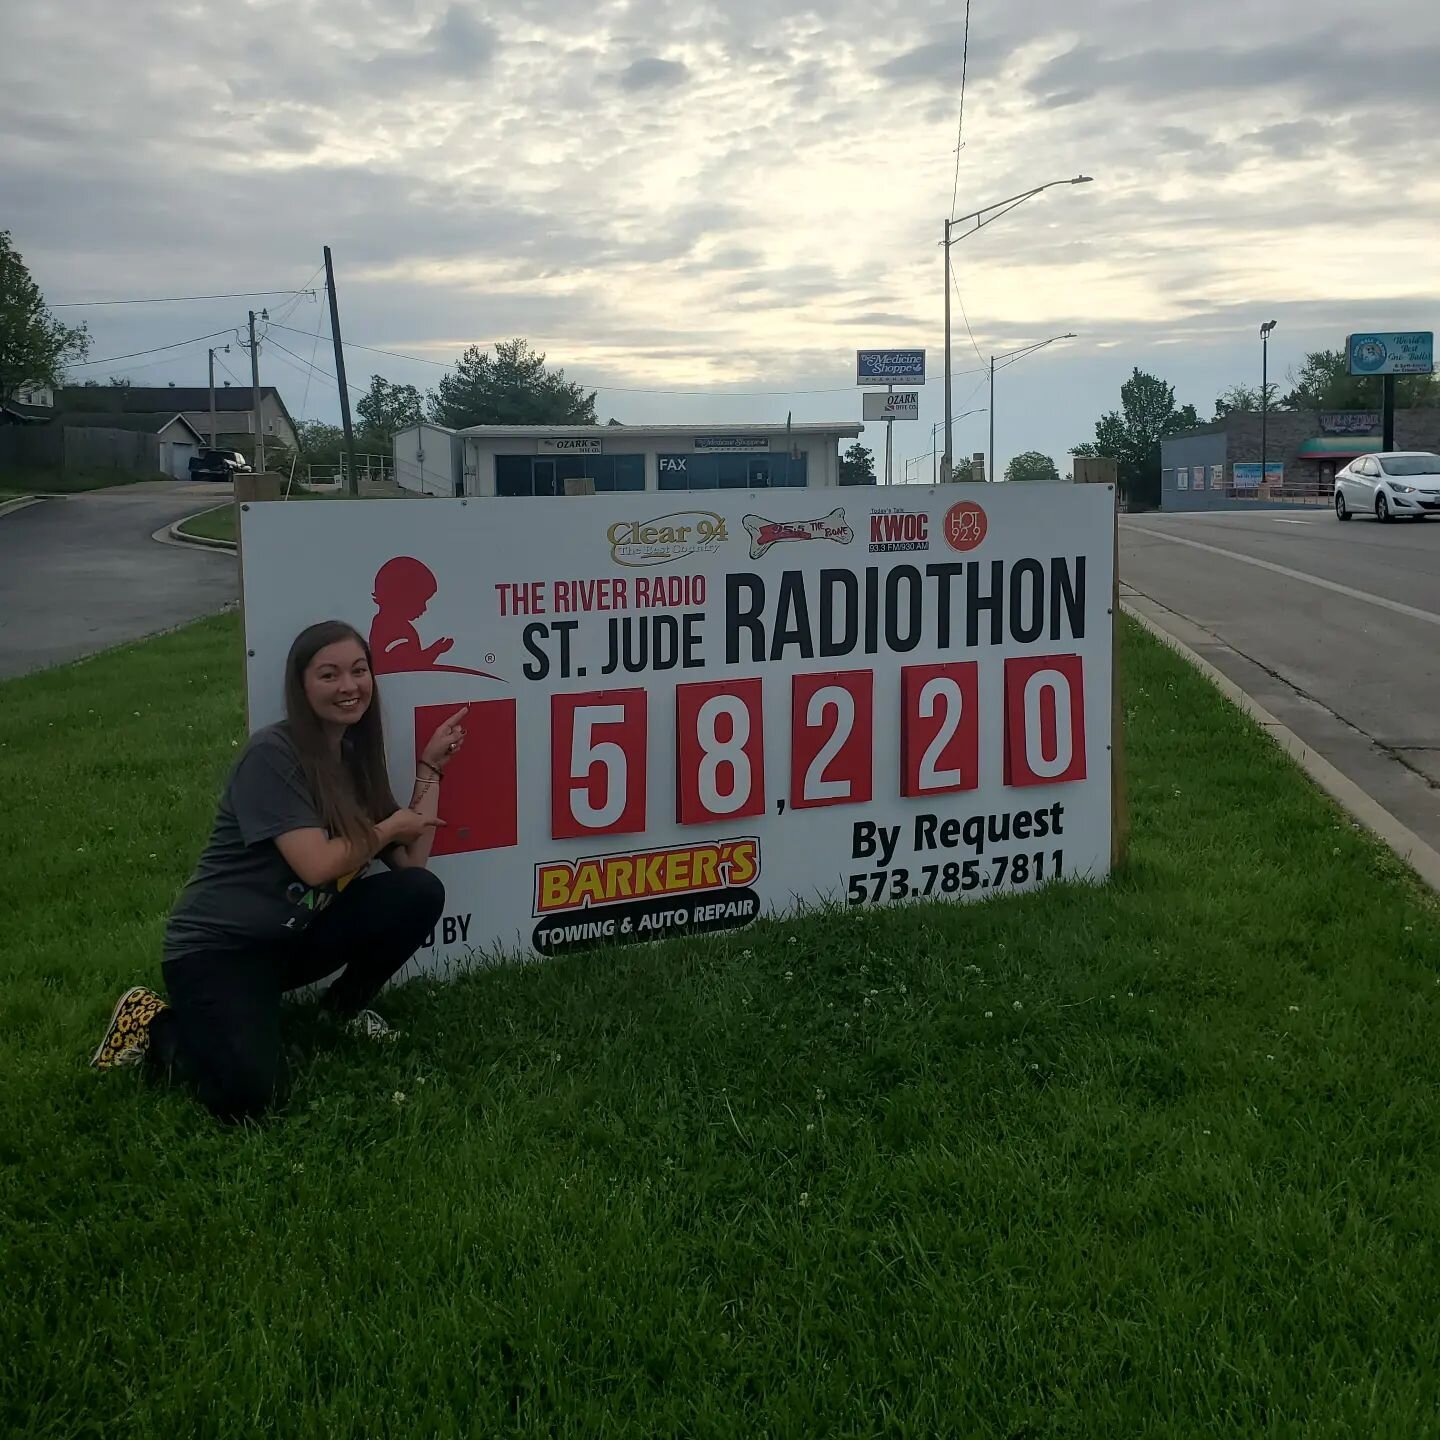 Ya'll are showin up for the kids but WE WONT STOP! Call now or come by River Radio. WE'RE OUT HERE!

1 800 330 9727

#MusicSaves #StJudeRadiothon #CountryCares